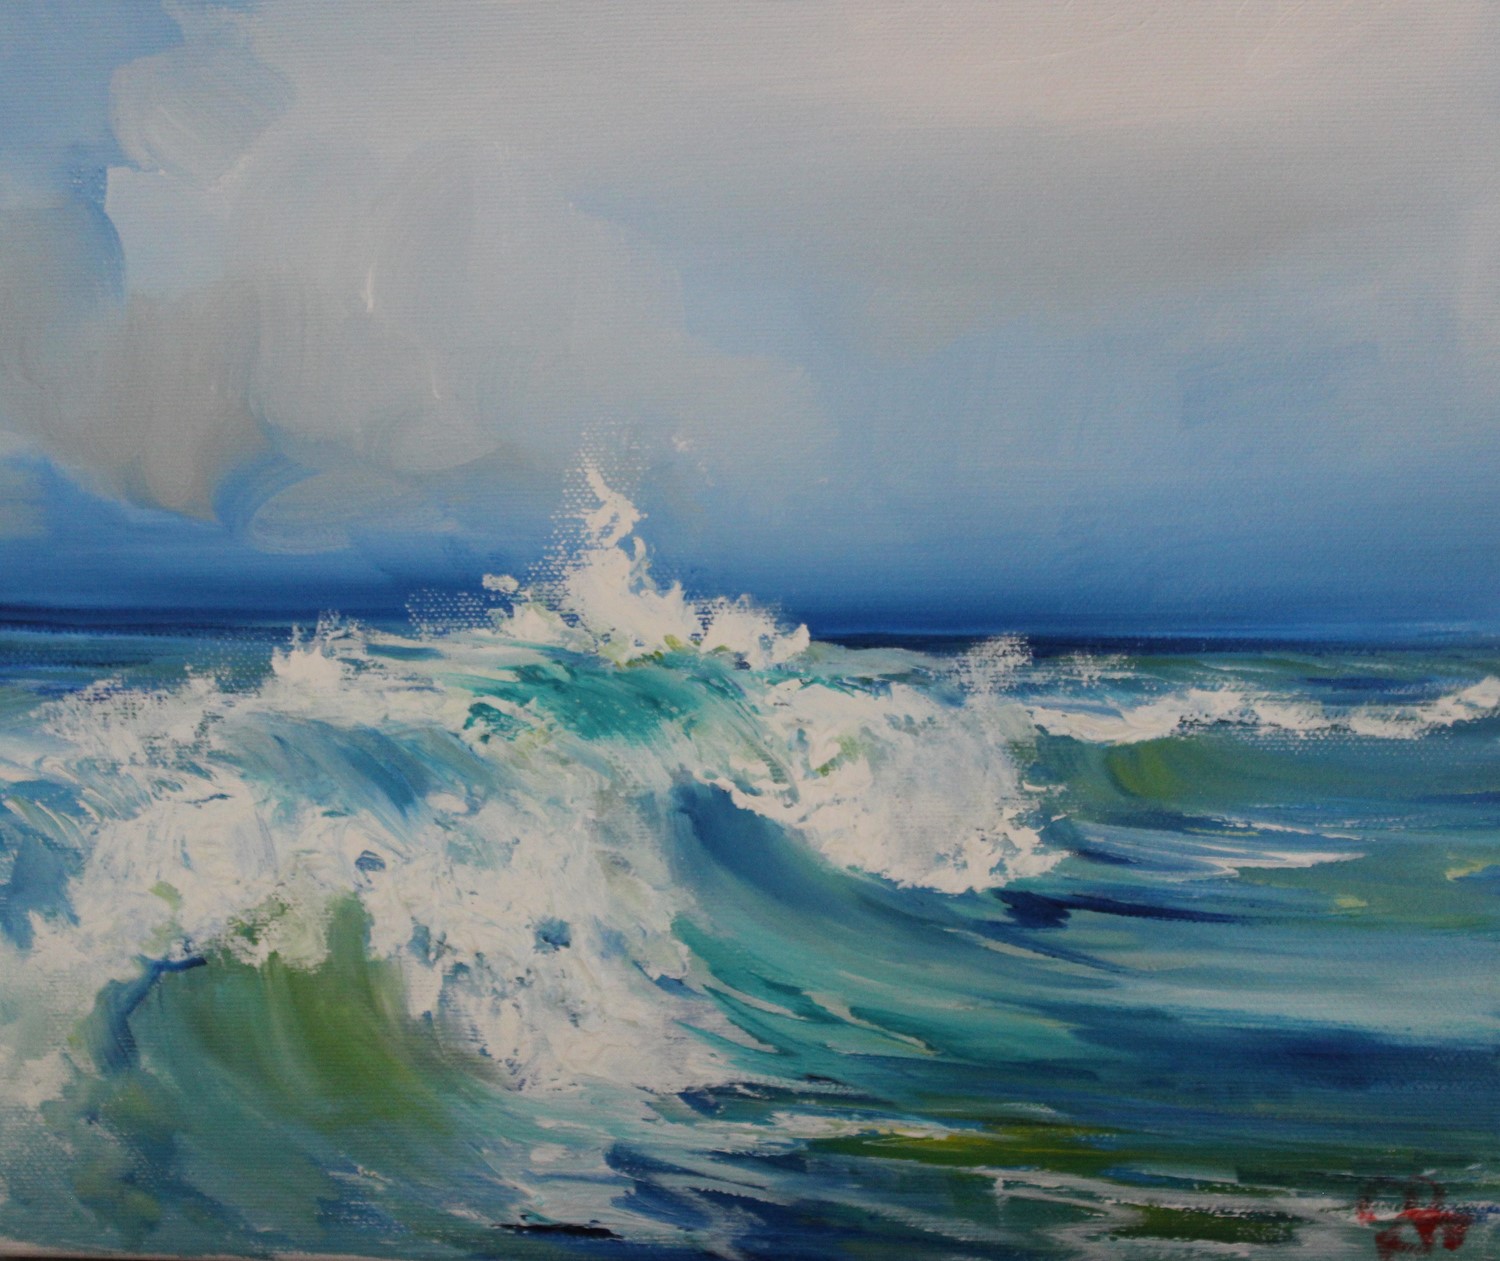 'Frothy Waves' by artist Rosanne Barr